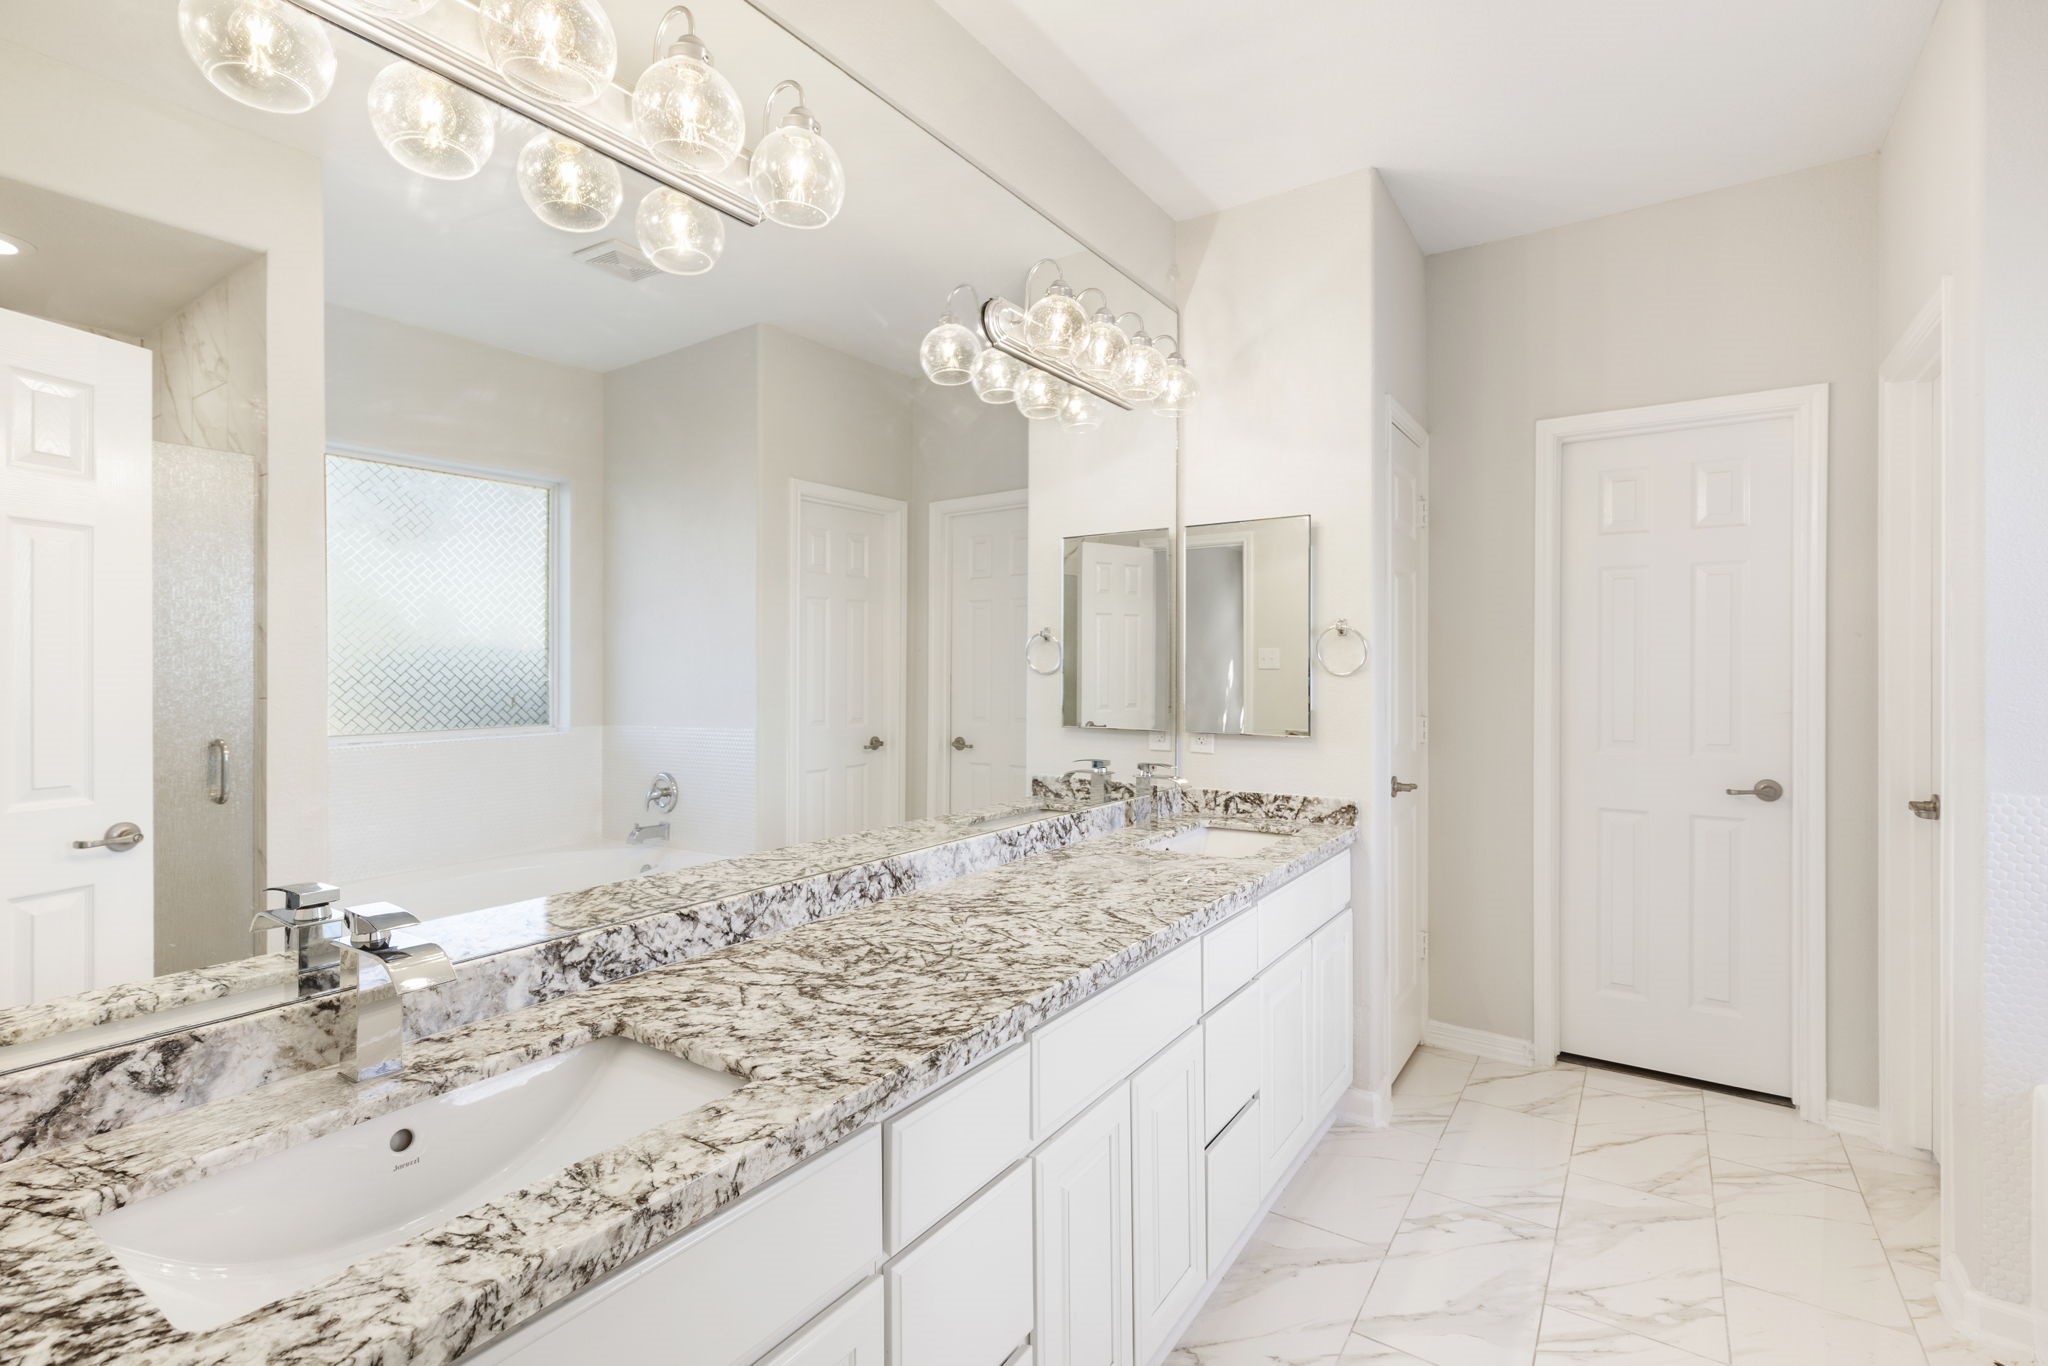 The primary bath offers double sinks with polished faucets. granite counters and upscale lighting.